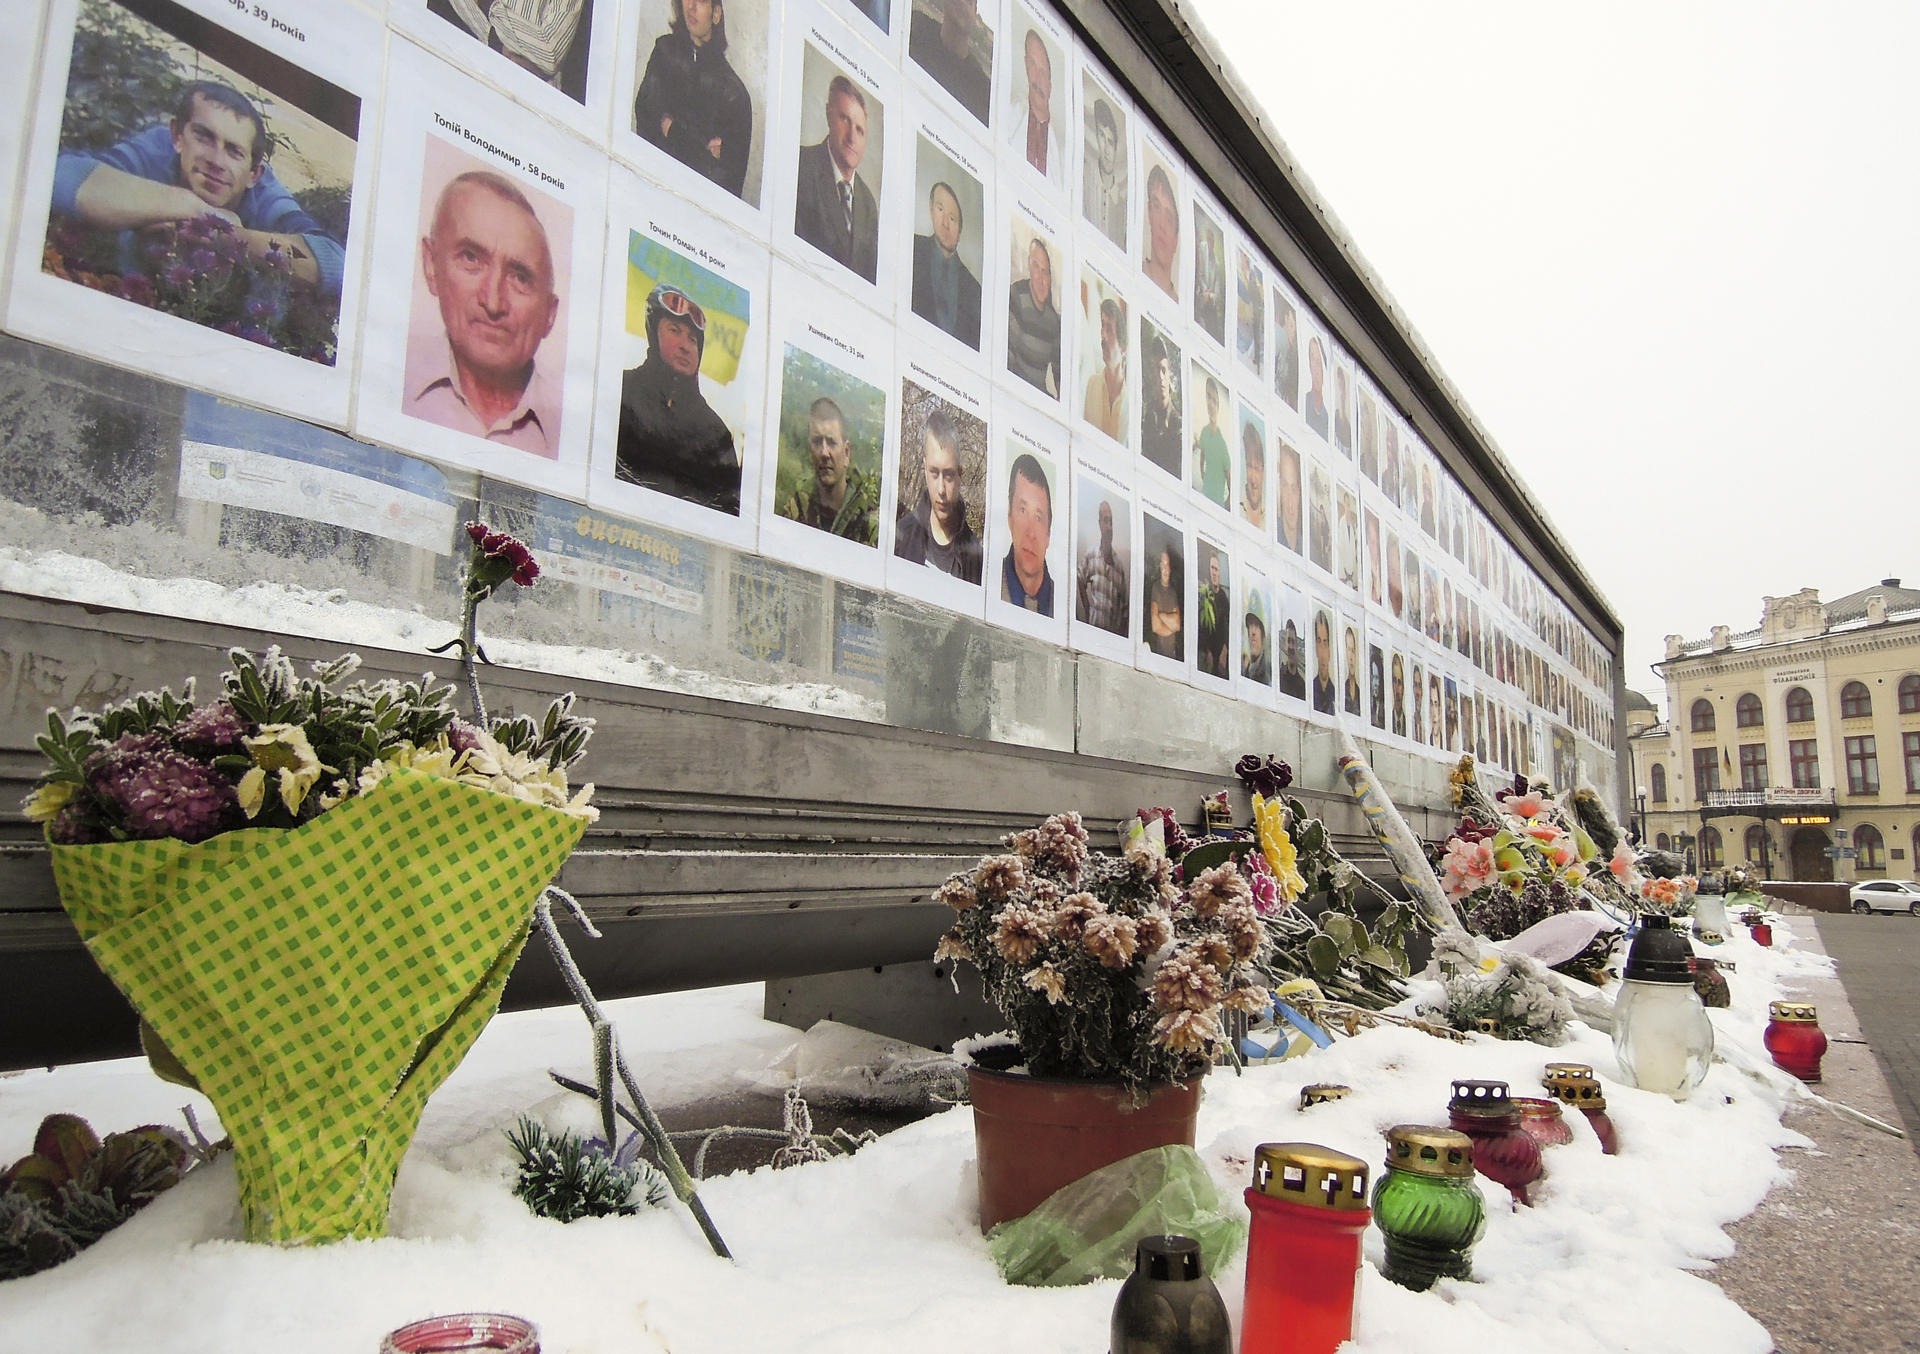 A memorial in Kiev honours those who died during the Maidan demonstrations.